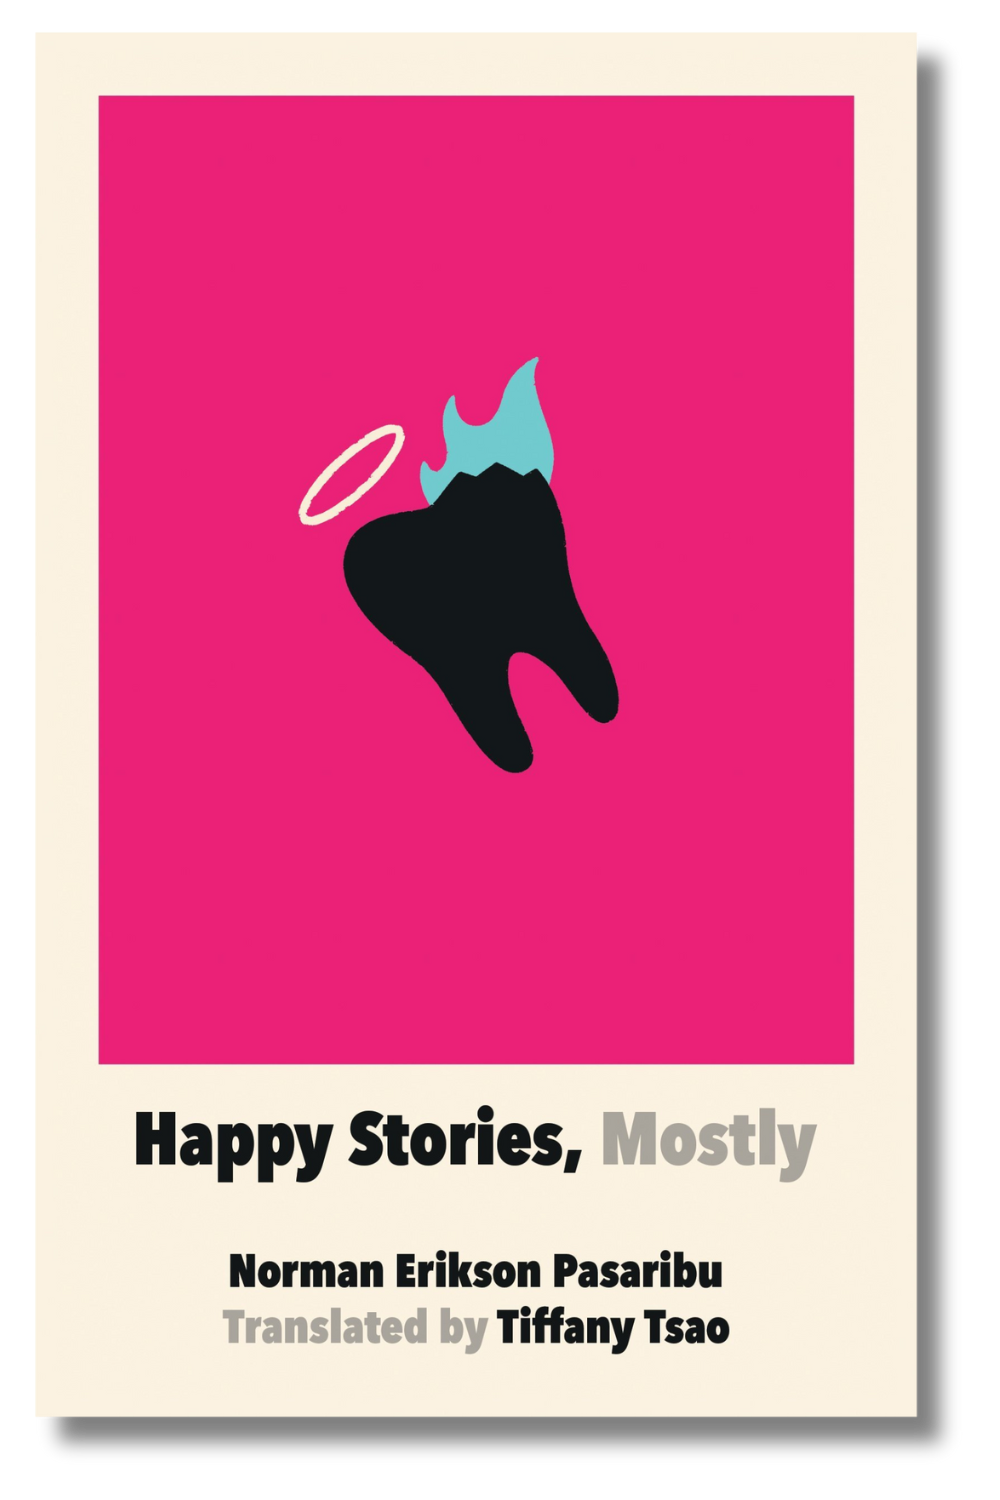 The cover of "Happy Stories, Mostly" by Norman Erikson Pasaribu